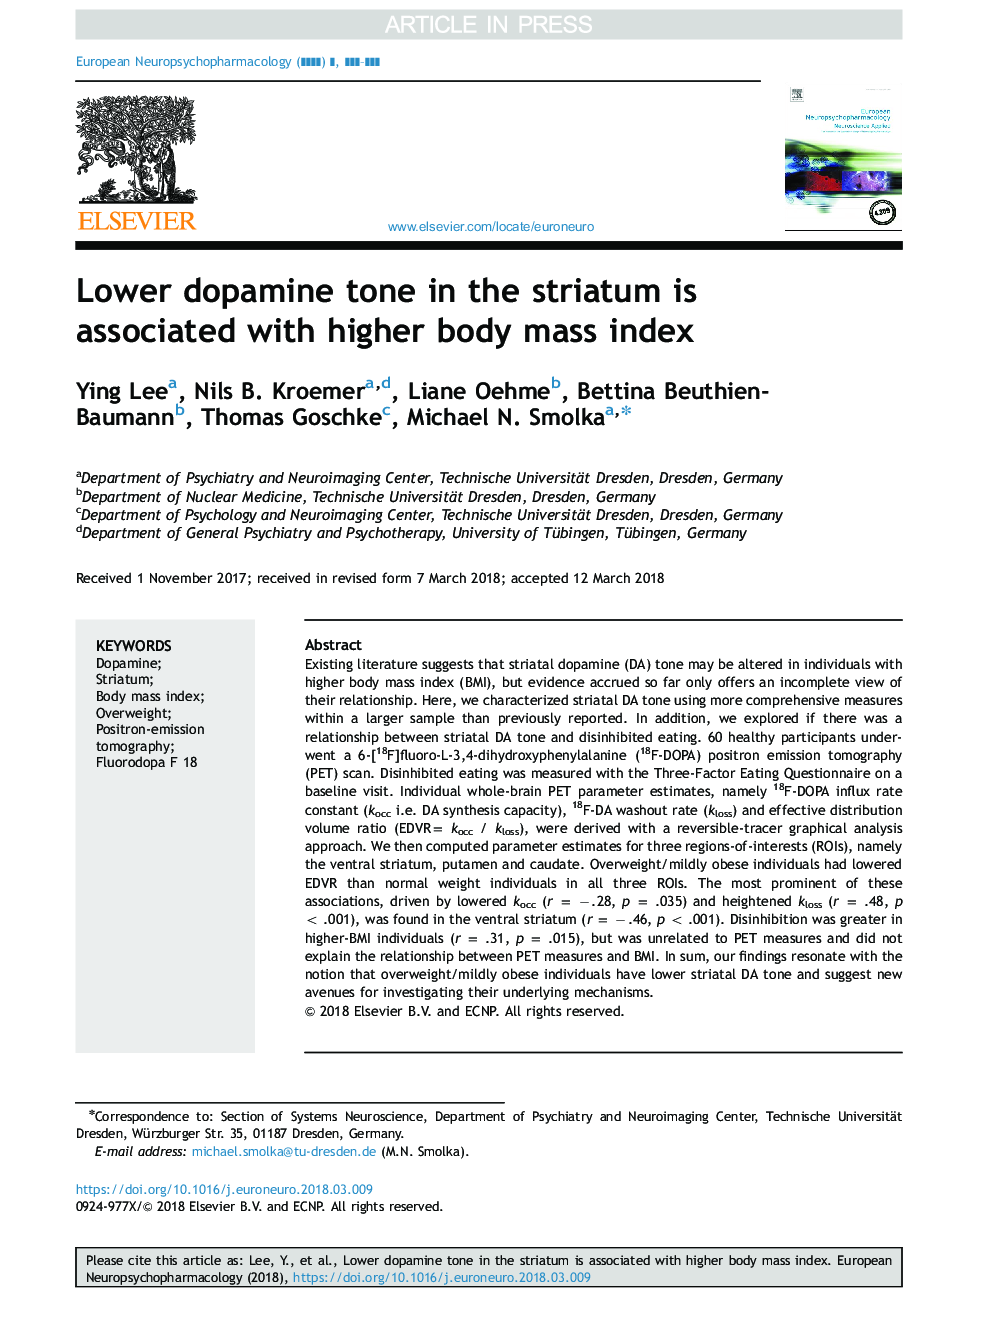 Lower dopamine tone in the striatum is associated with higher body mass index